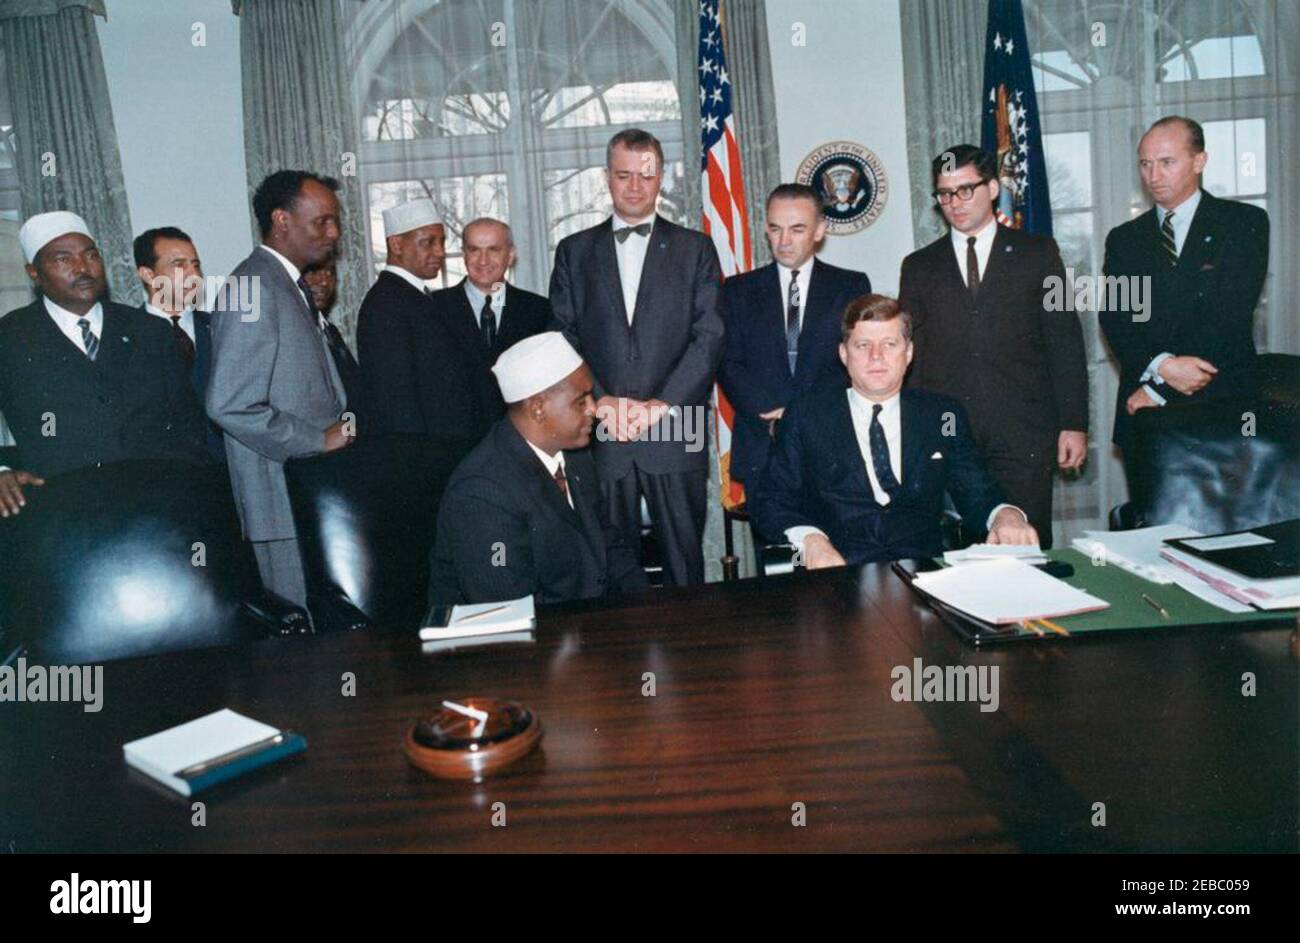 Meeting with Abdirashid Ali Shermarke, Prime Minister of the Somali Republic, 12:00PM. President John F. Kennedy meets with Prime Minister of the Somali Republic, Dr. Abdirashid Ali Shermarke (seated in center). Also pictured: Ambassador of the Somali Republic, Dr. Omar Mohallim Mohamed; Minister of Foreign Affairs of the Somali Republic, Abdullahi Issa Mohamud; U.S. Deputy Assistant Secretary of State for African Affairs, Henry J. Tasca; Assistant Secretary of State for African Affairs, G. Mennen u0022Soapyu0022 Williams; deputy administrator of the Agency for International Development (AID Stock Photo